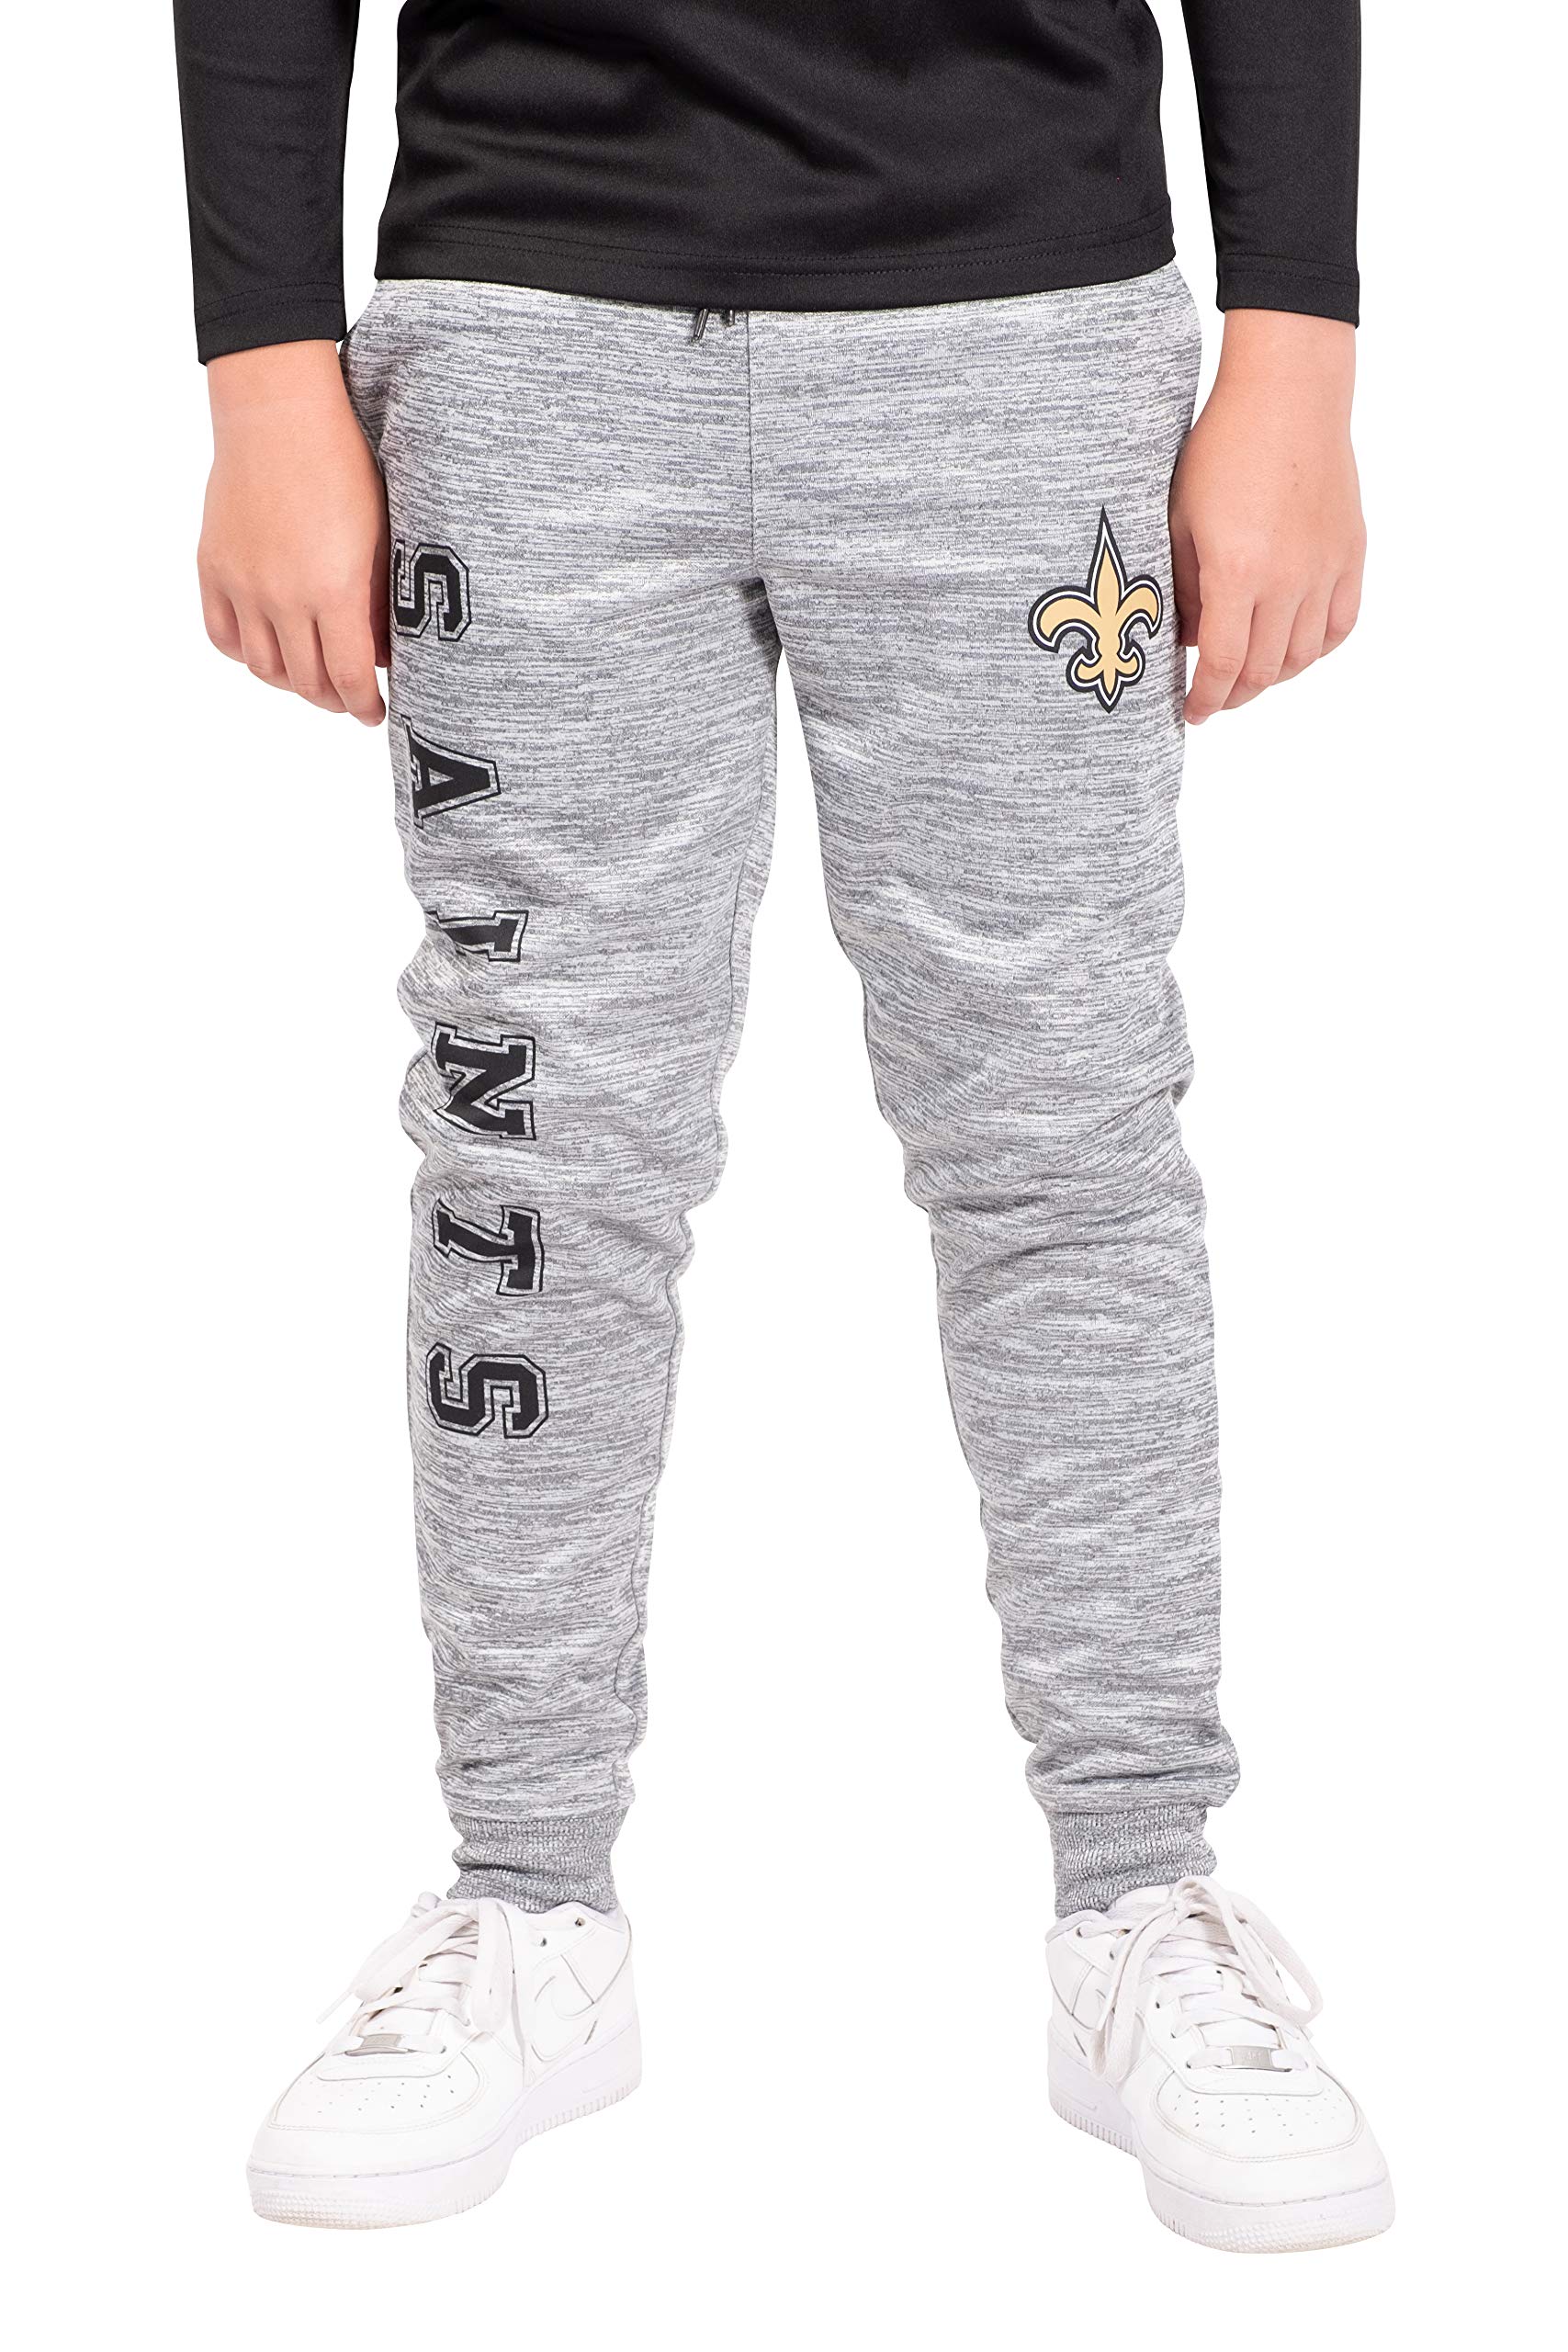 Ultra Game NFL New Orleans Saints Youth High Performance Moisture Wicking Fleece Jogger Sweatpants|New Orleans Saints